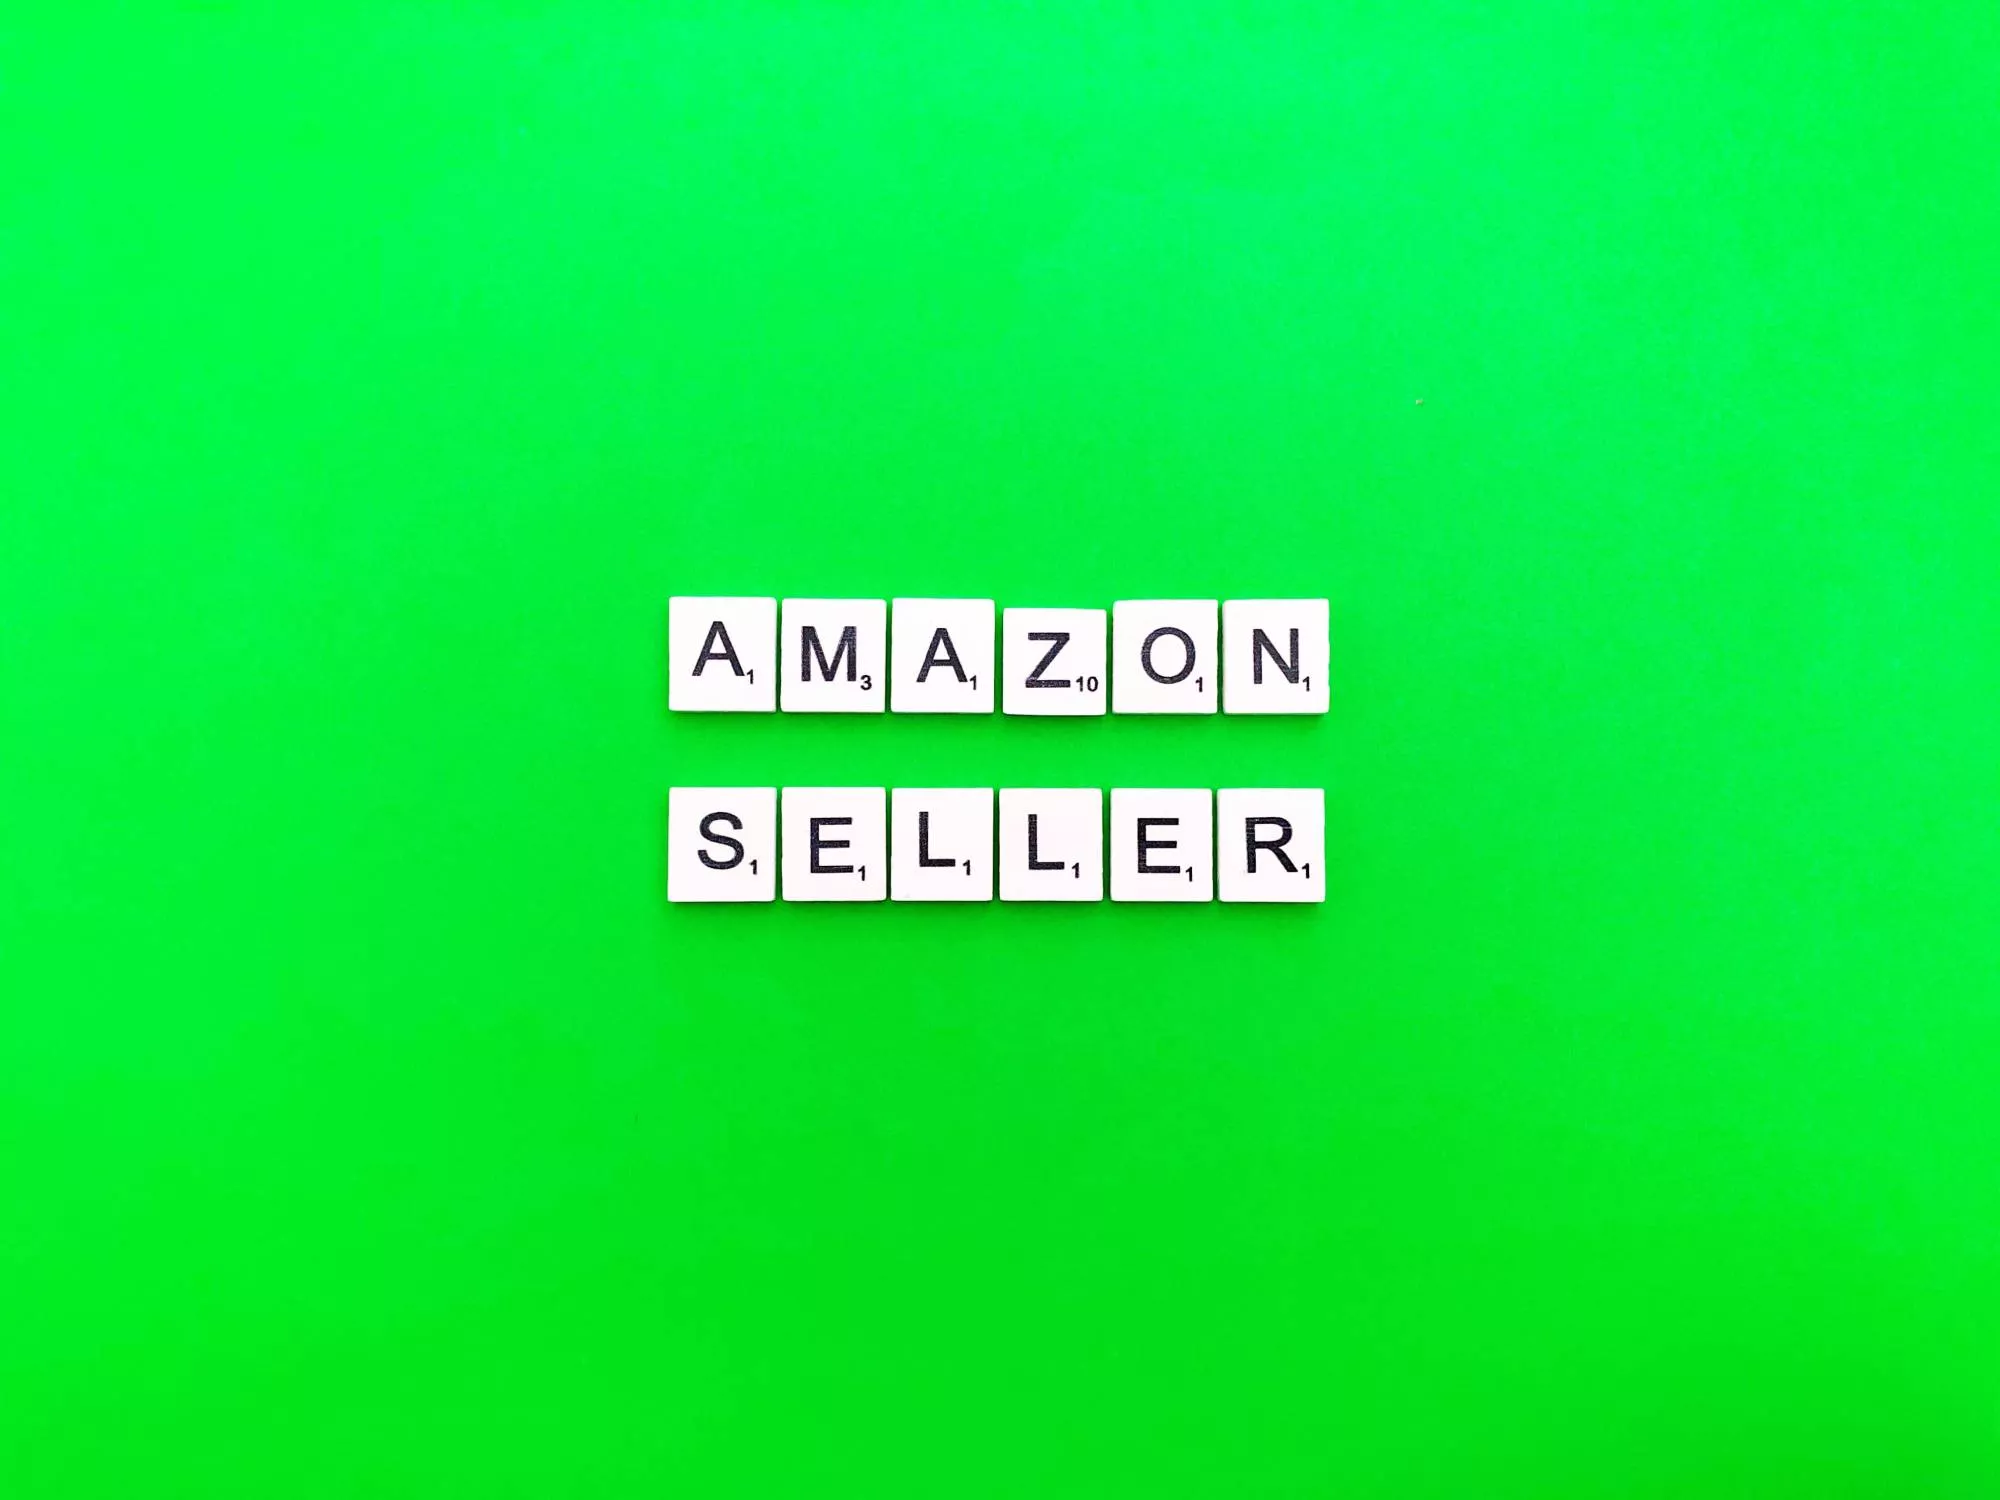 word blocks that spell amazon seller on a neon green background